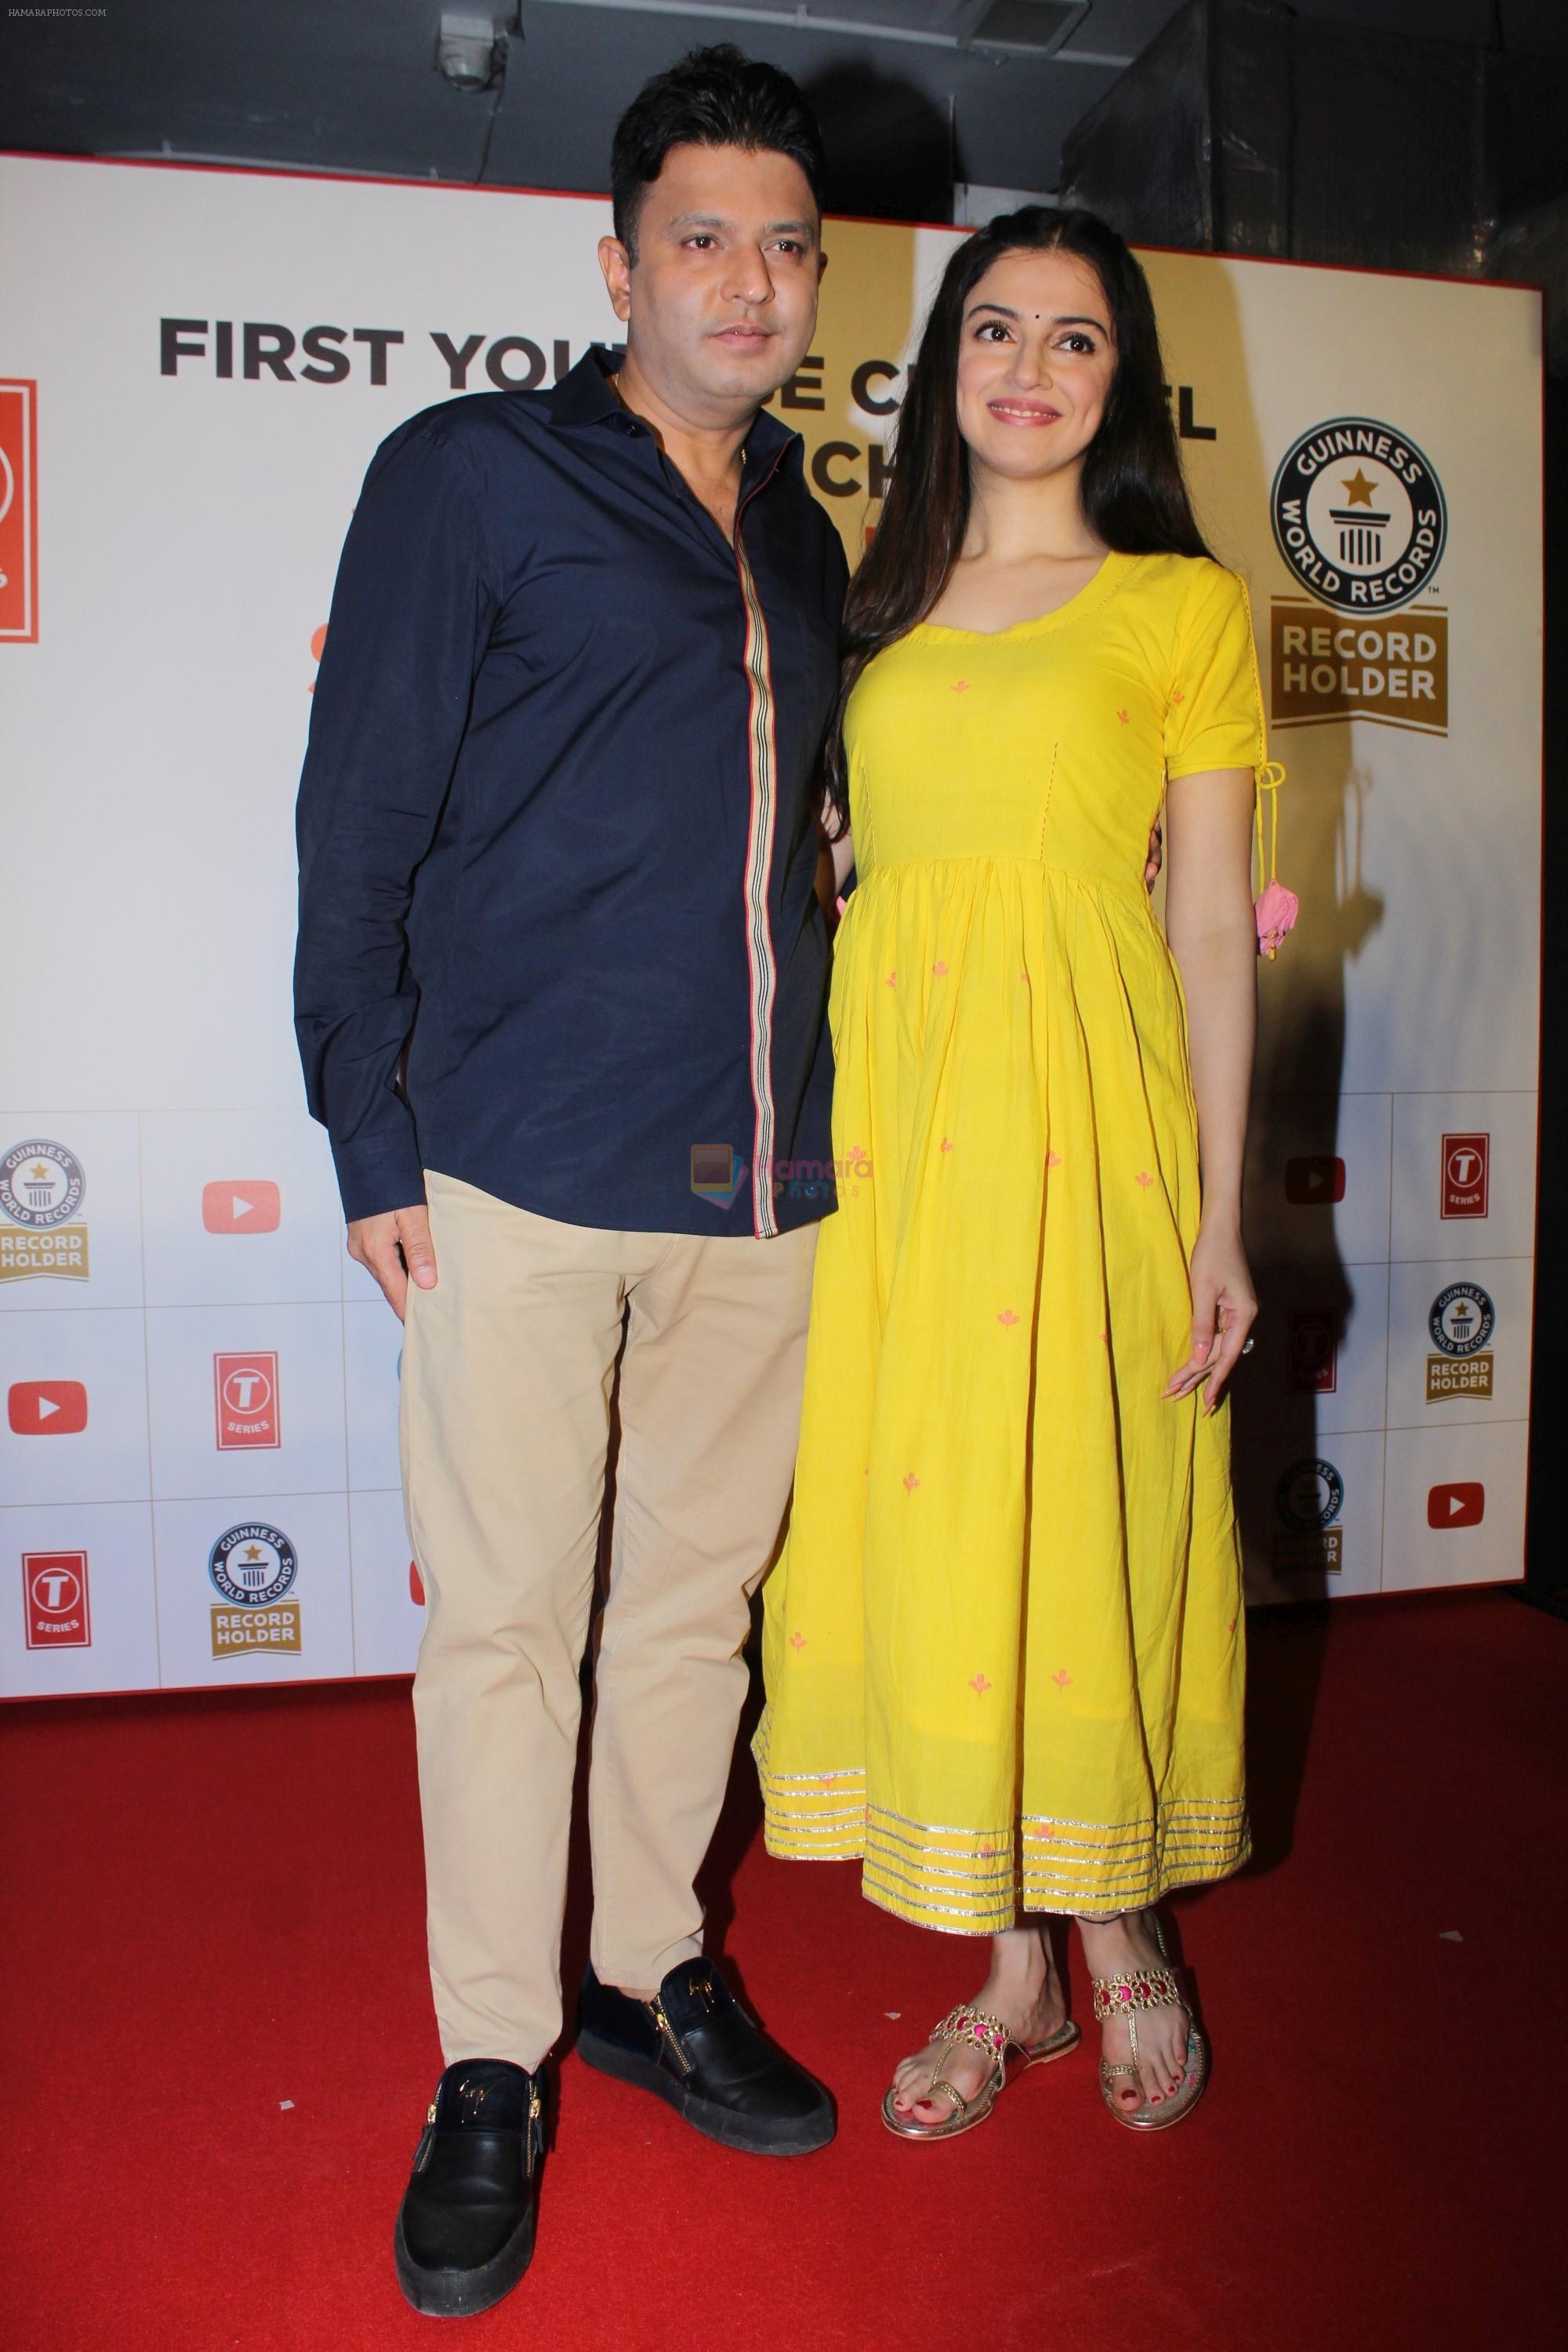 Divya Kumar , Bhushan Kumar has been felicitated with an official certificate from Guinness World Records as T-Series became the first YouTube channel to reach 100 million subscribers on 17th June 2019